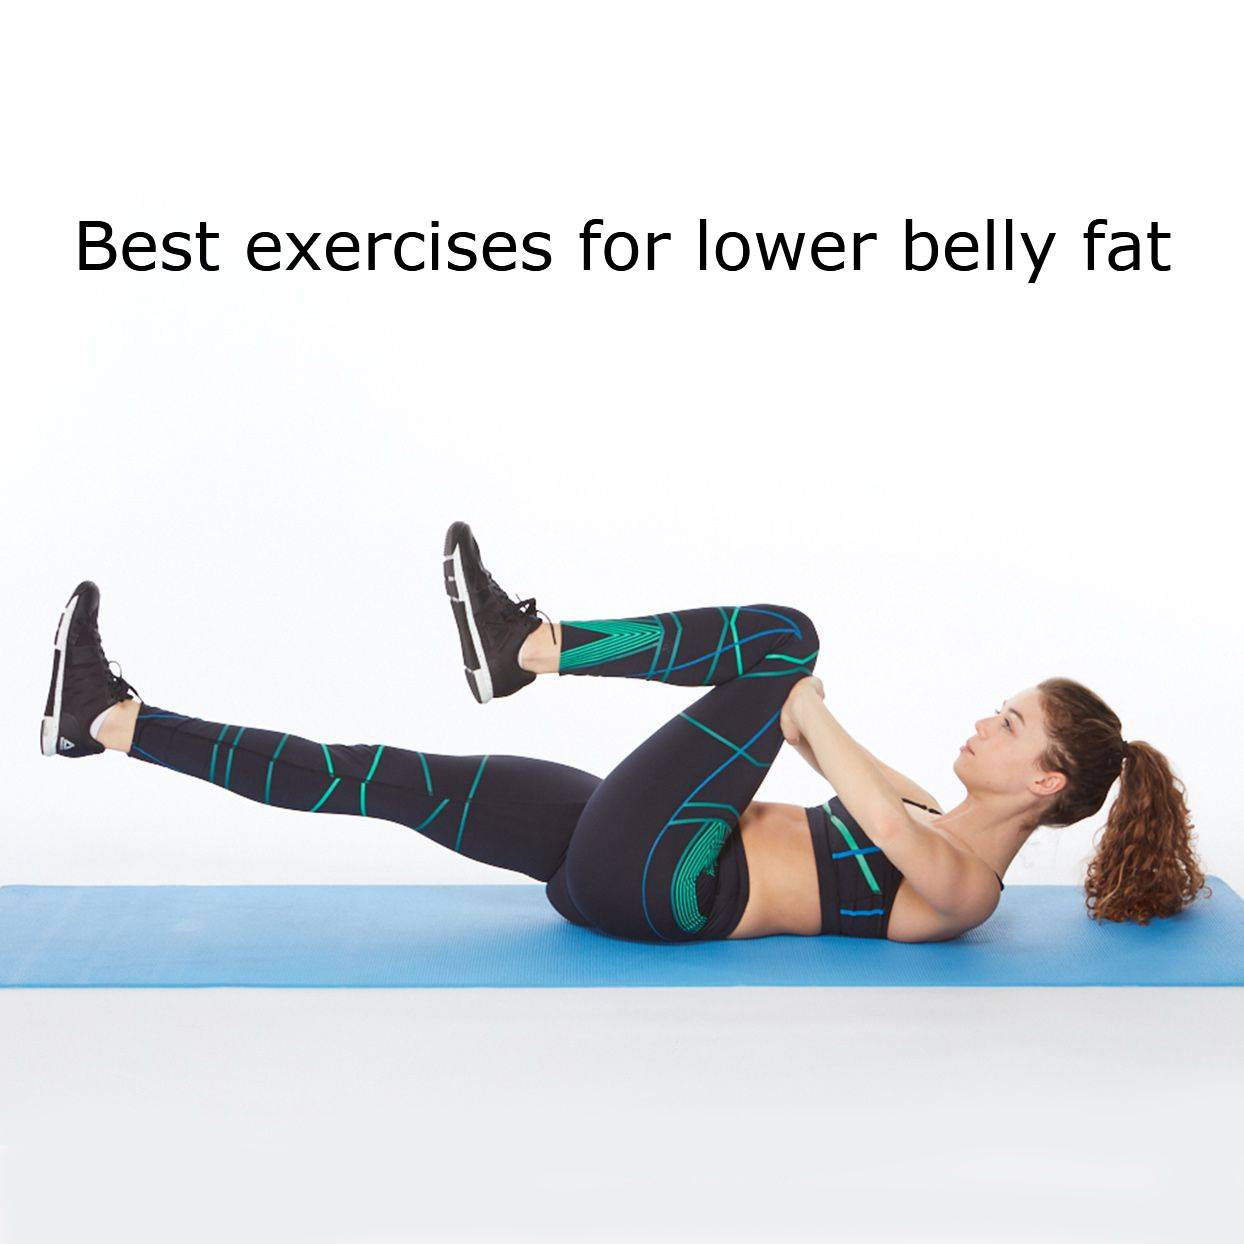 10 Best Exercises To Melt Lower Belly Fat